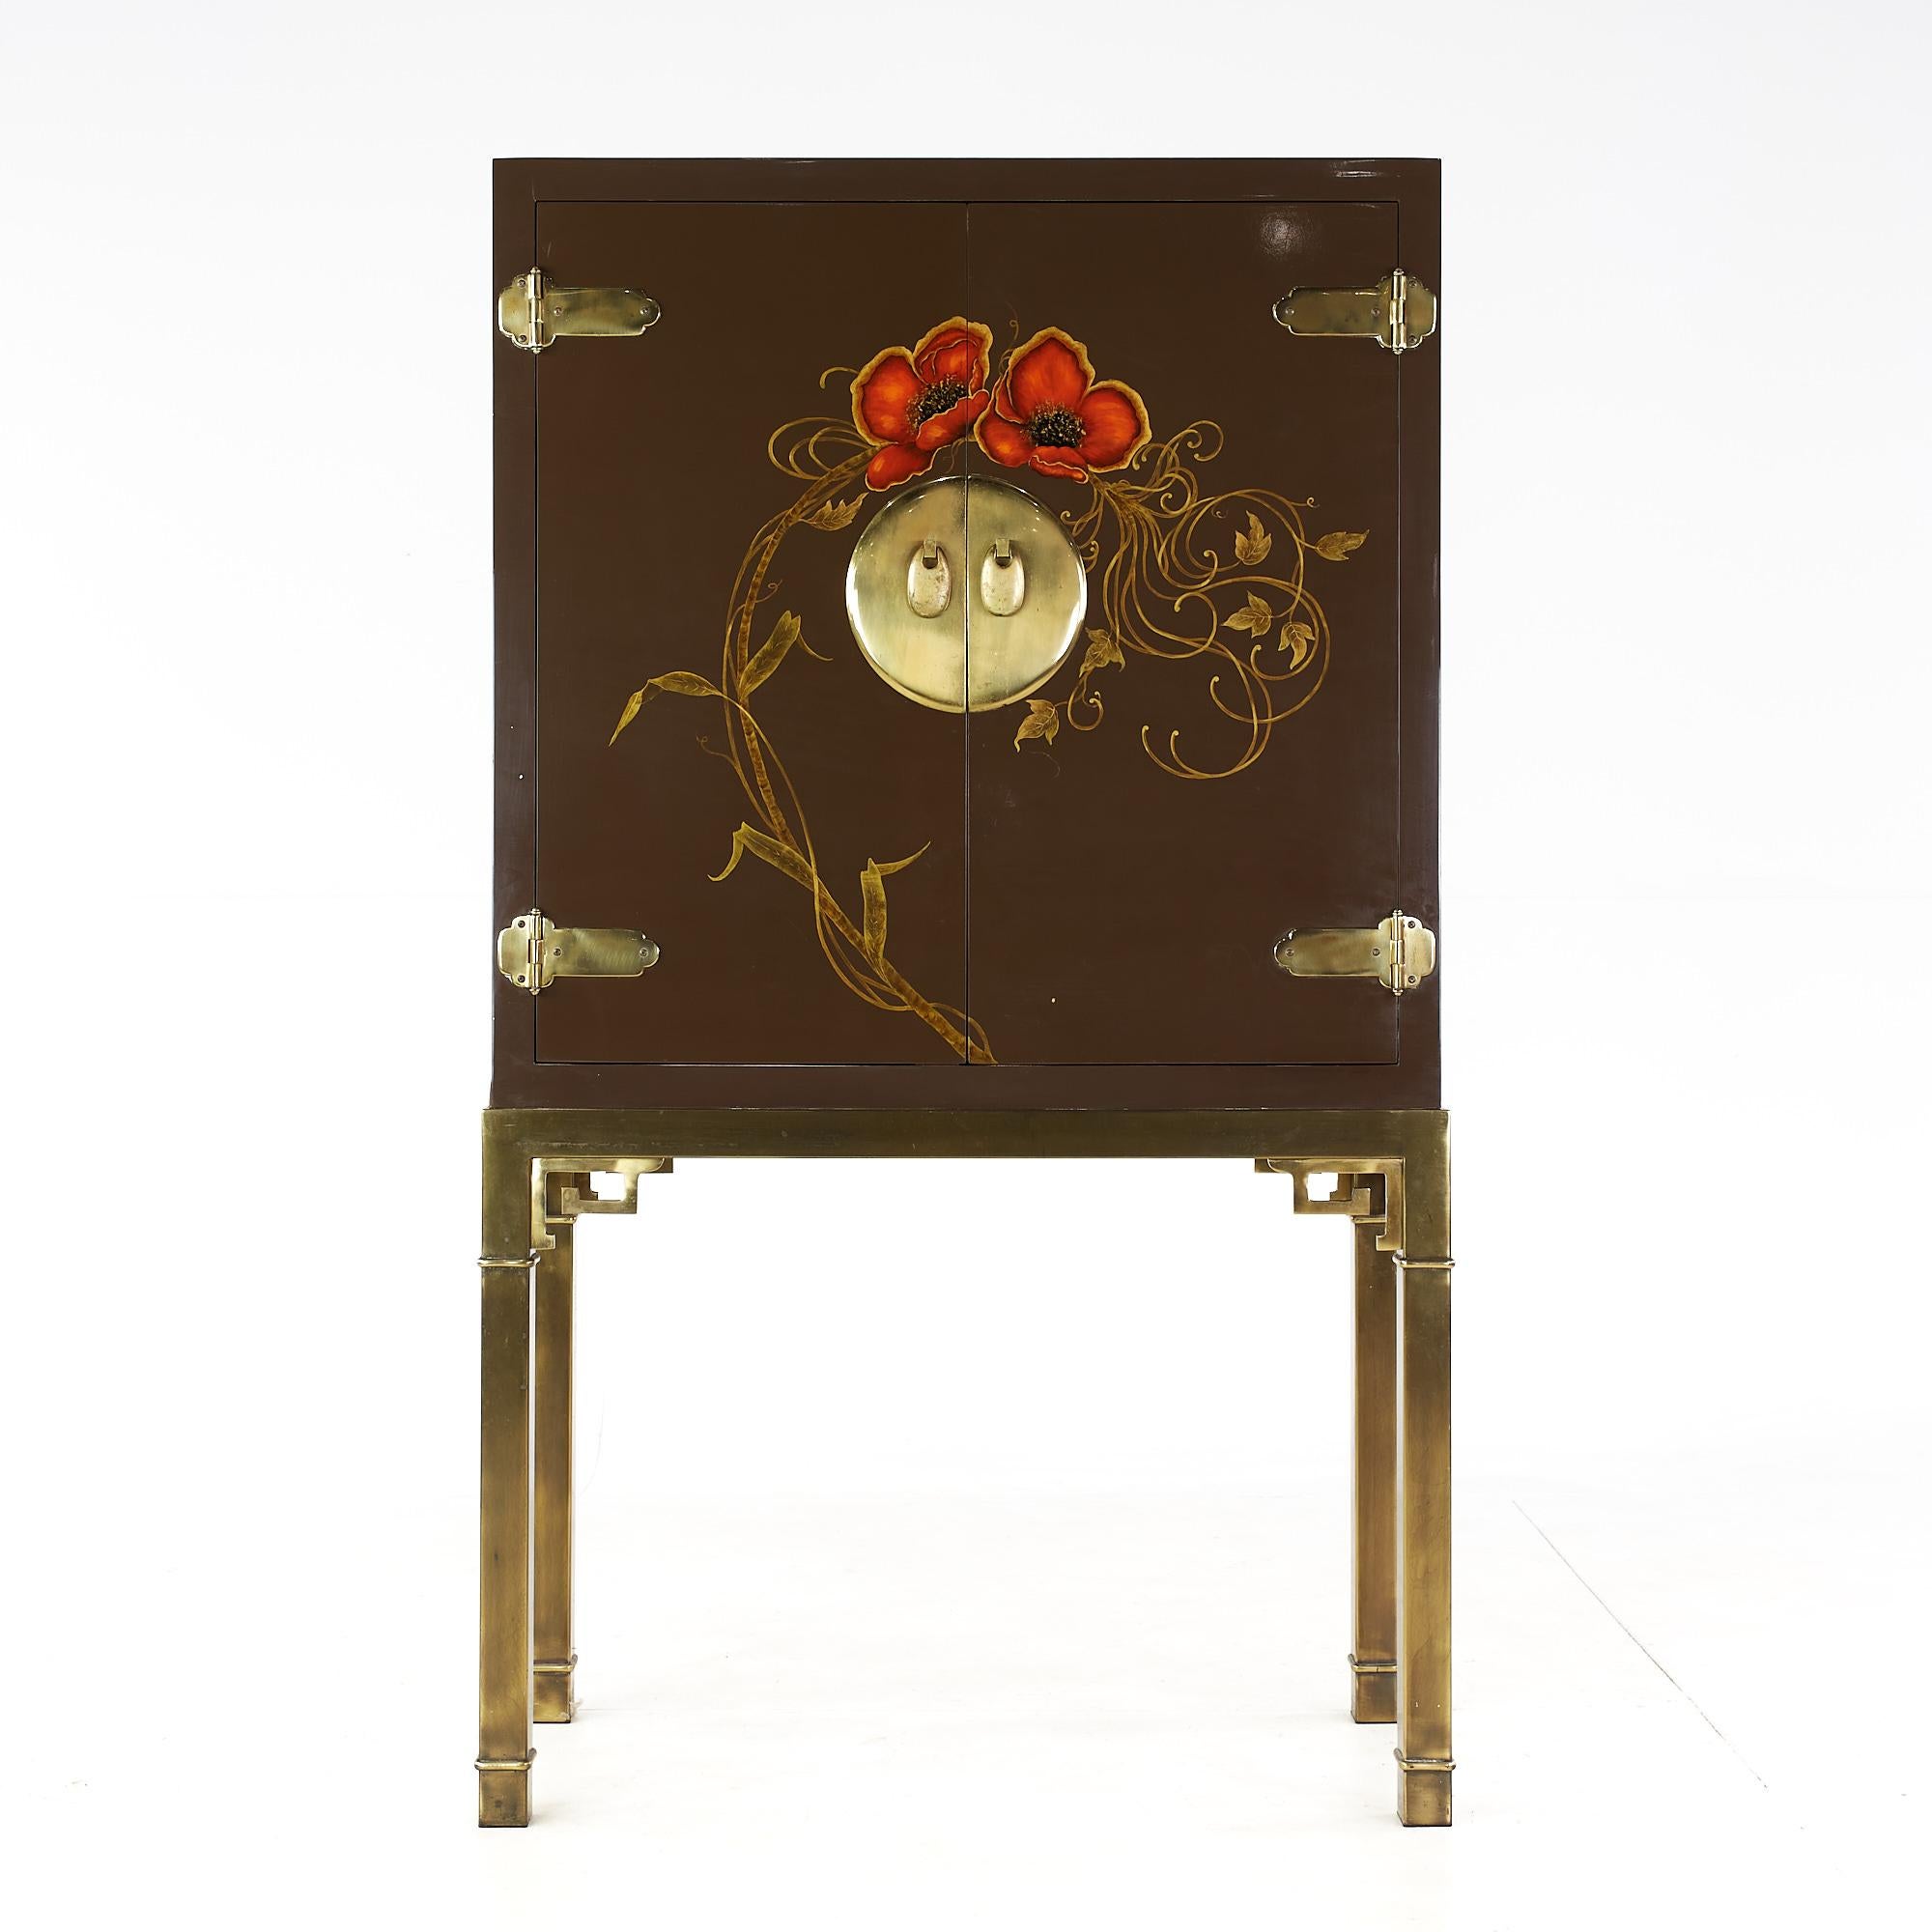 Mastercraft Mid Century Asian Inspired Lacquered Bar Cabinet on Brass Stand

This bar cabinet measures: 39 wide x 18 deep x 57 inches tall

All pieces of furniture can be had in what we call restored vintage condition. That means the piece is